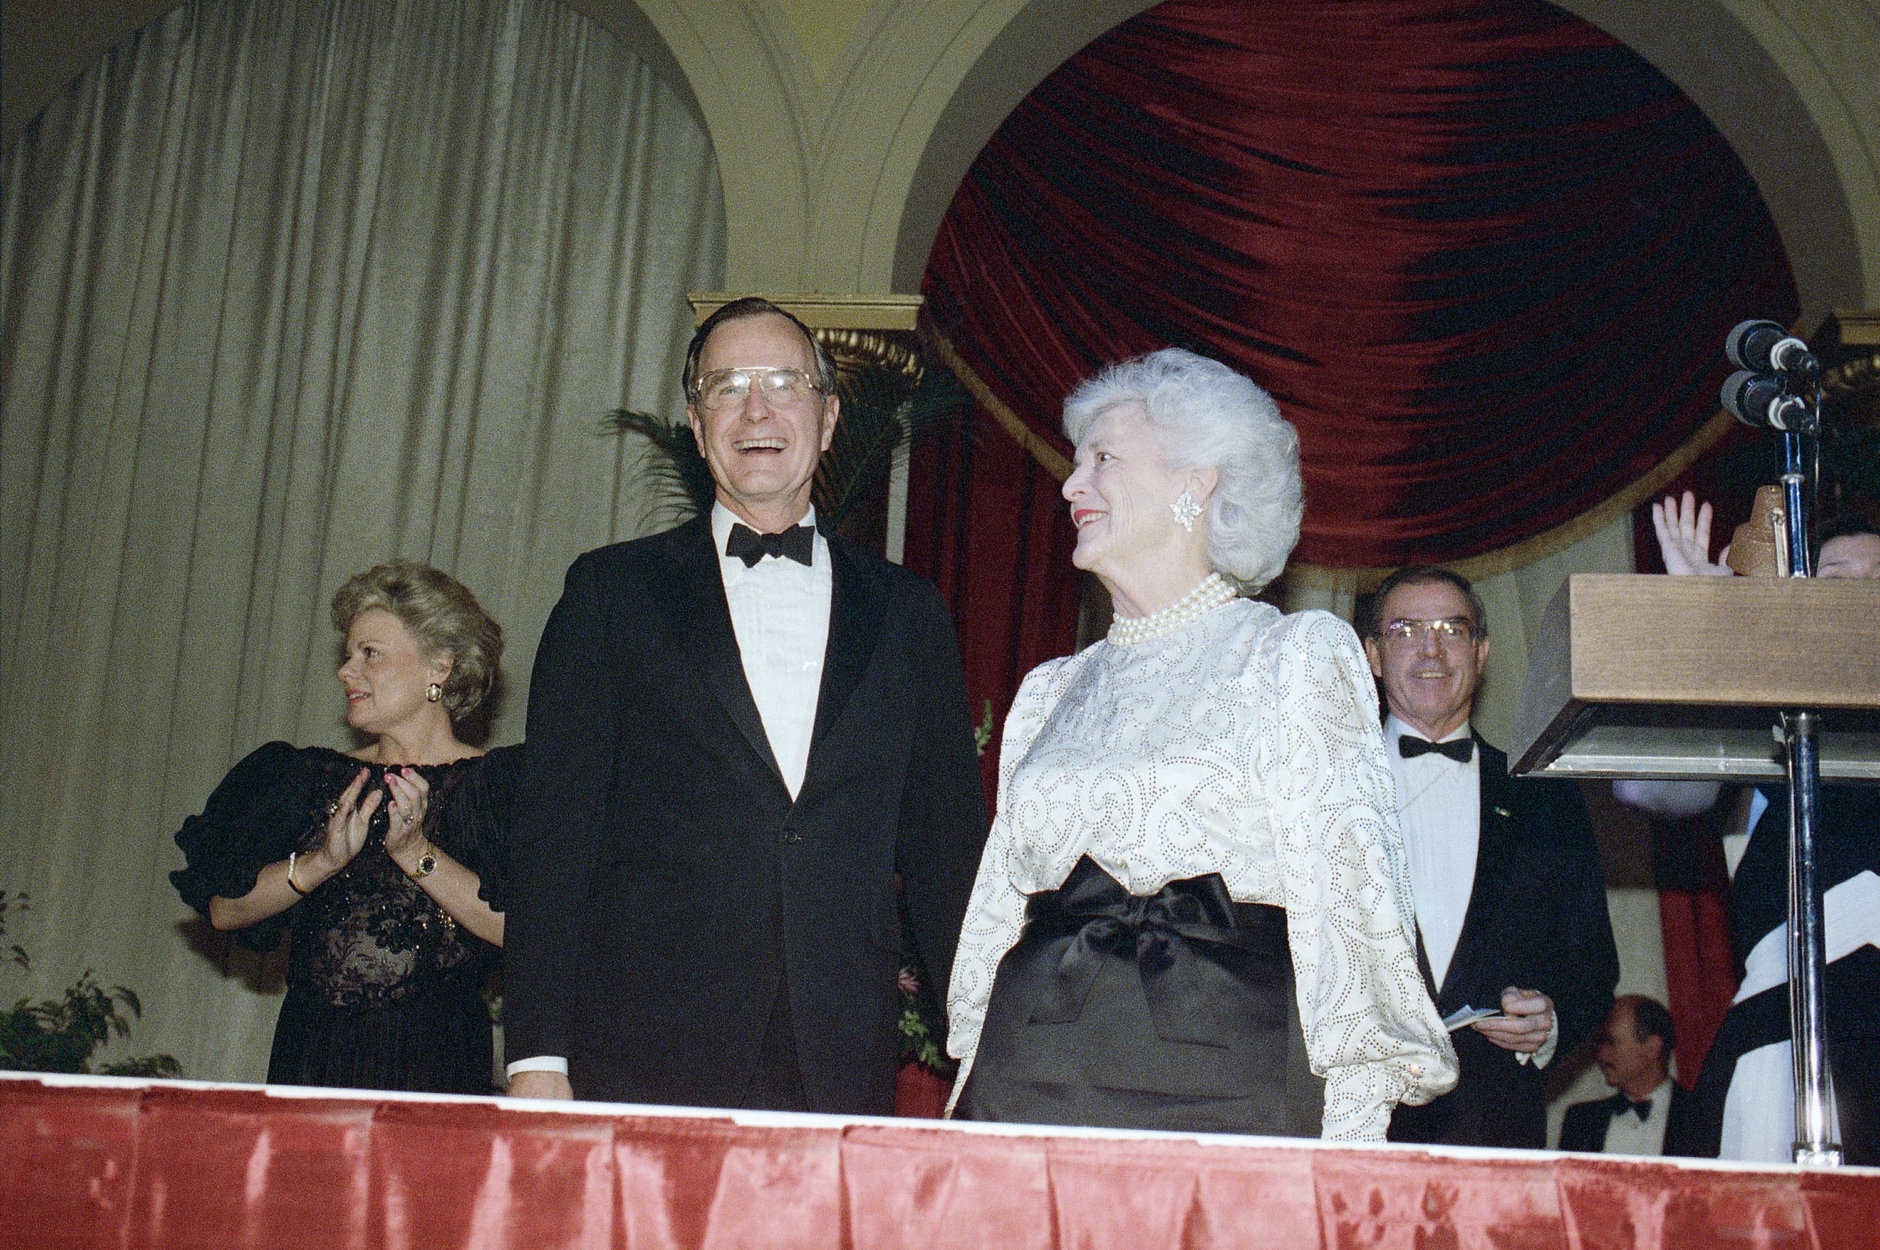 President-elect George H. W. Bush, left, and his wife, Barbara, right, smile at well-wishers during their second inaugural ball of the evening at the Pension Building, Jan. 18, 1989, Washington, D.C. (AP Photo/Marcy Nighwander)